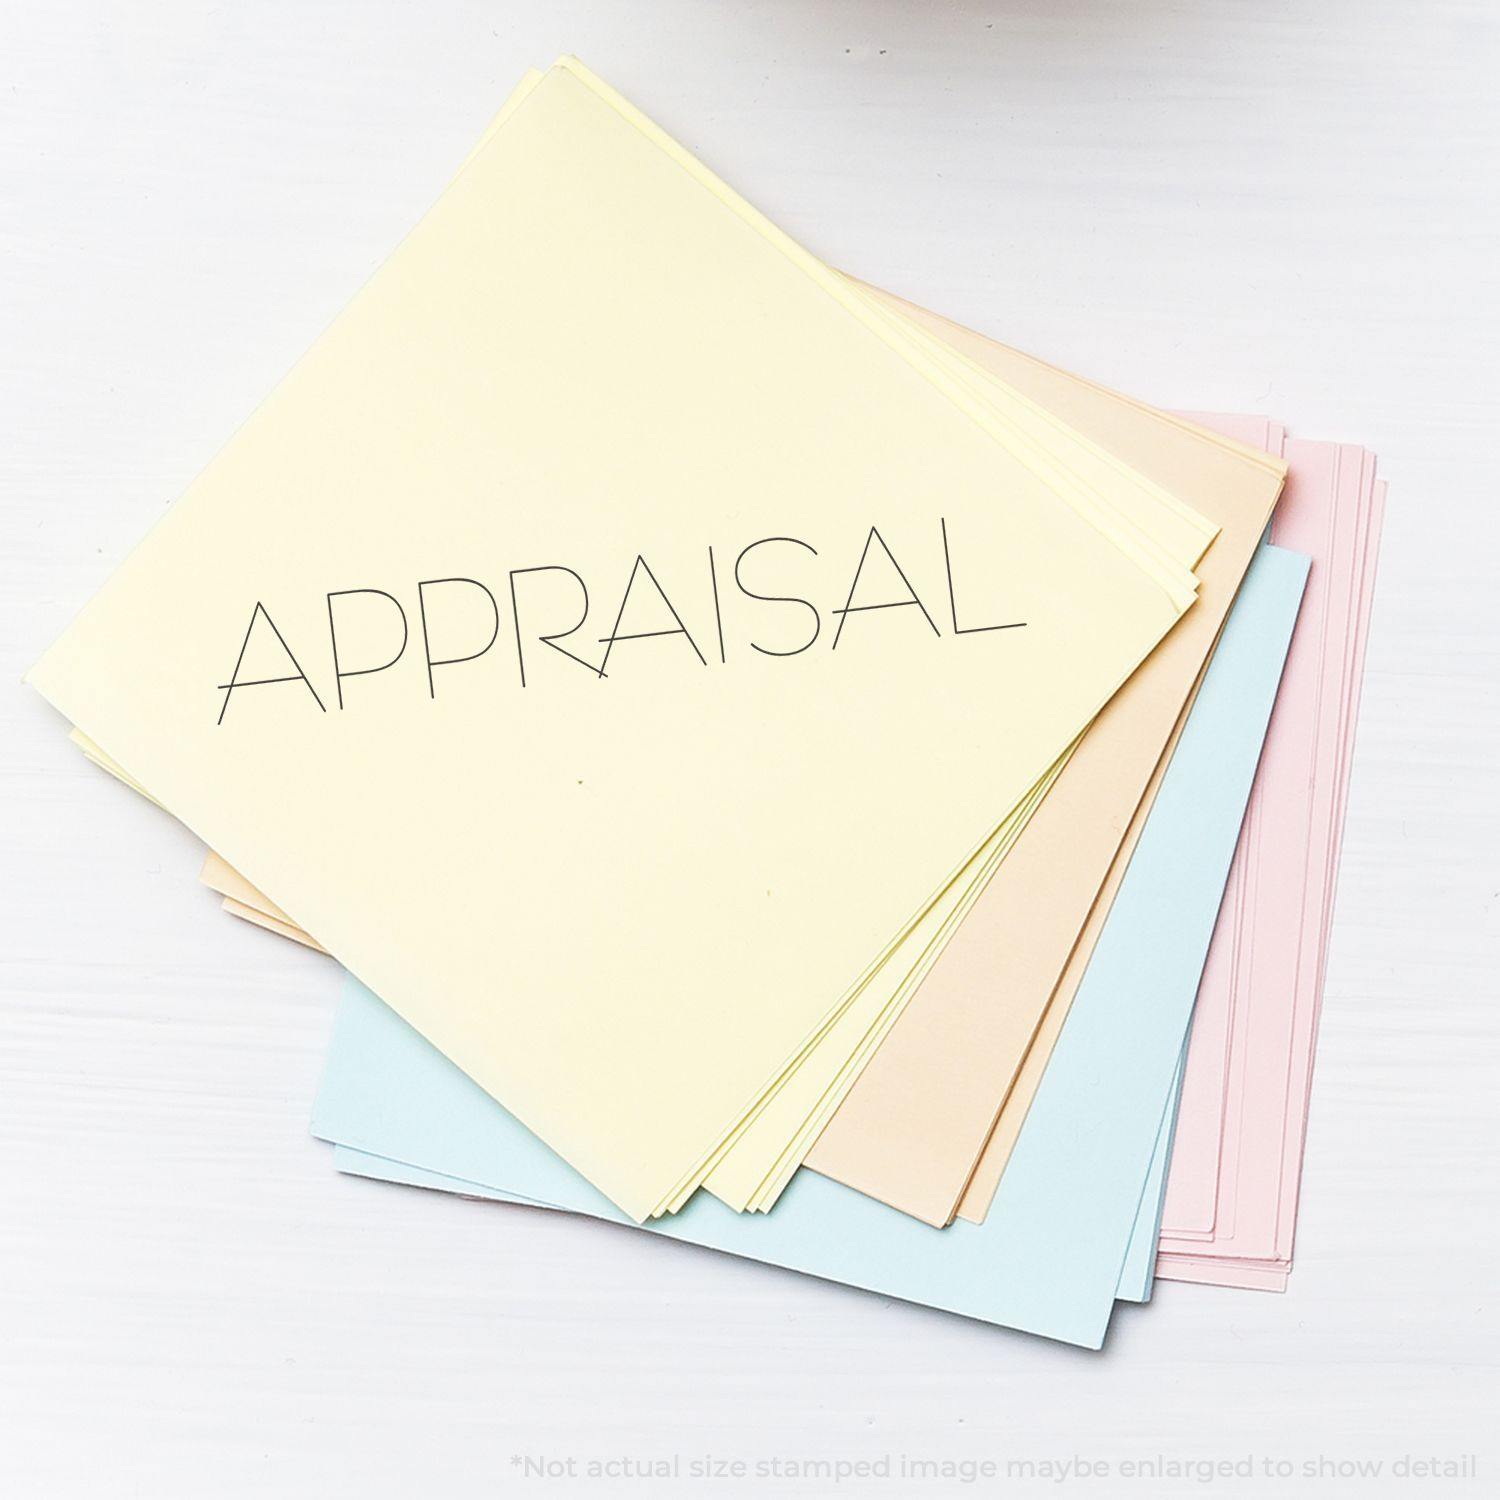 A self-inking stamp with a stamped image showing how the text "APPRAISAL" in a unique-looking font is displayed by it.